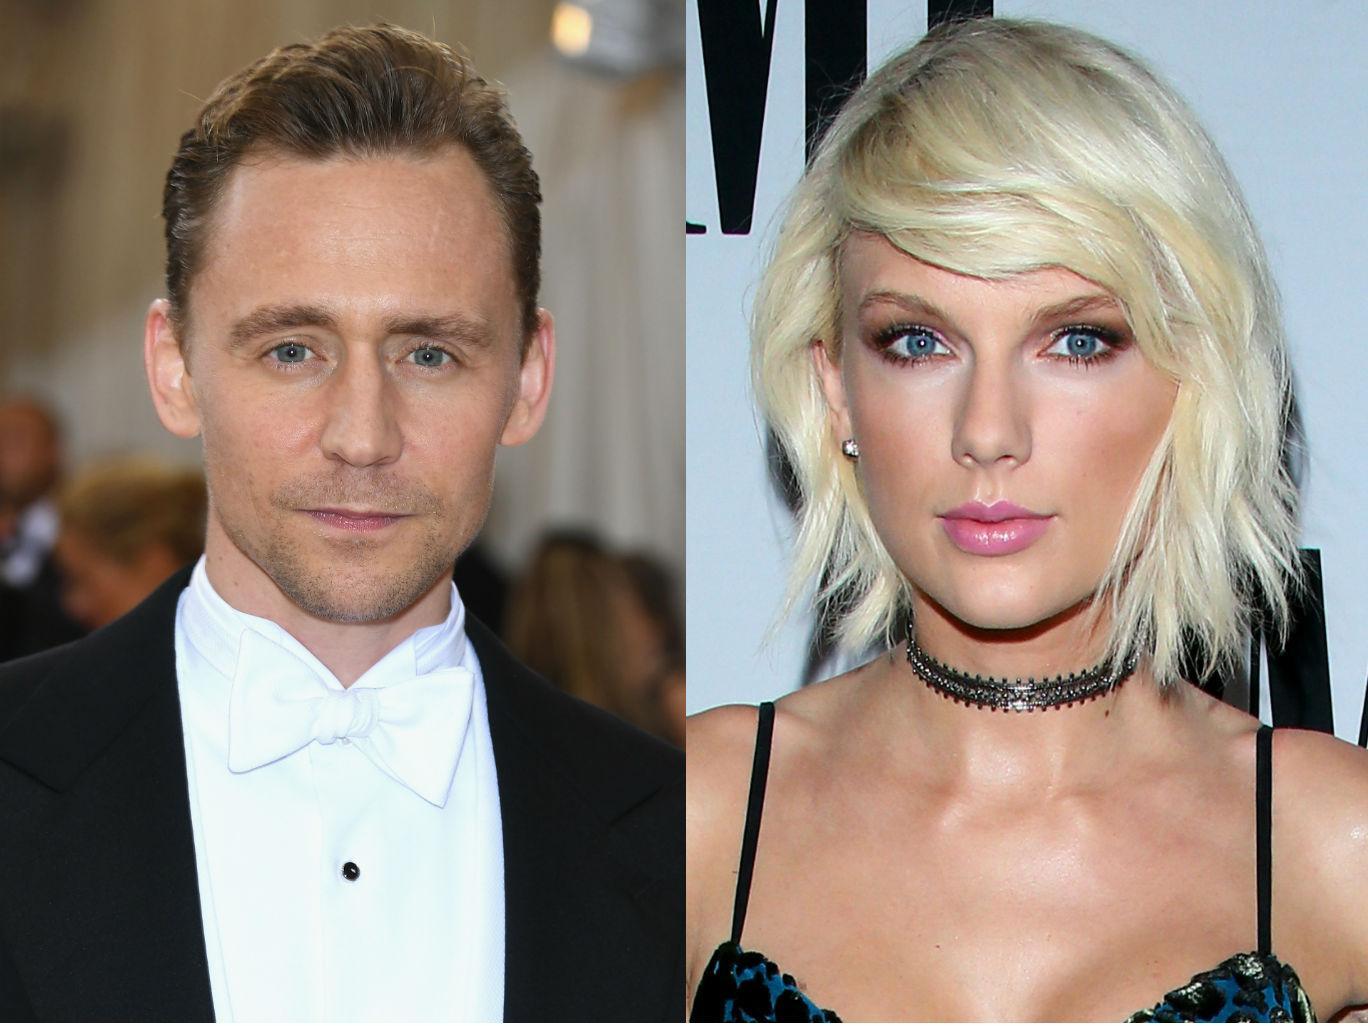 Hiddleston dismissed the theories floated by some that their relationship was a mere PR stunt